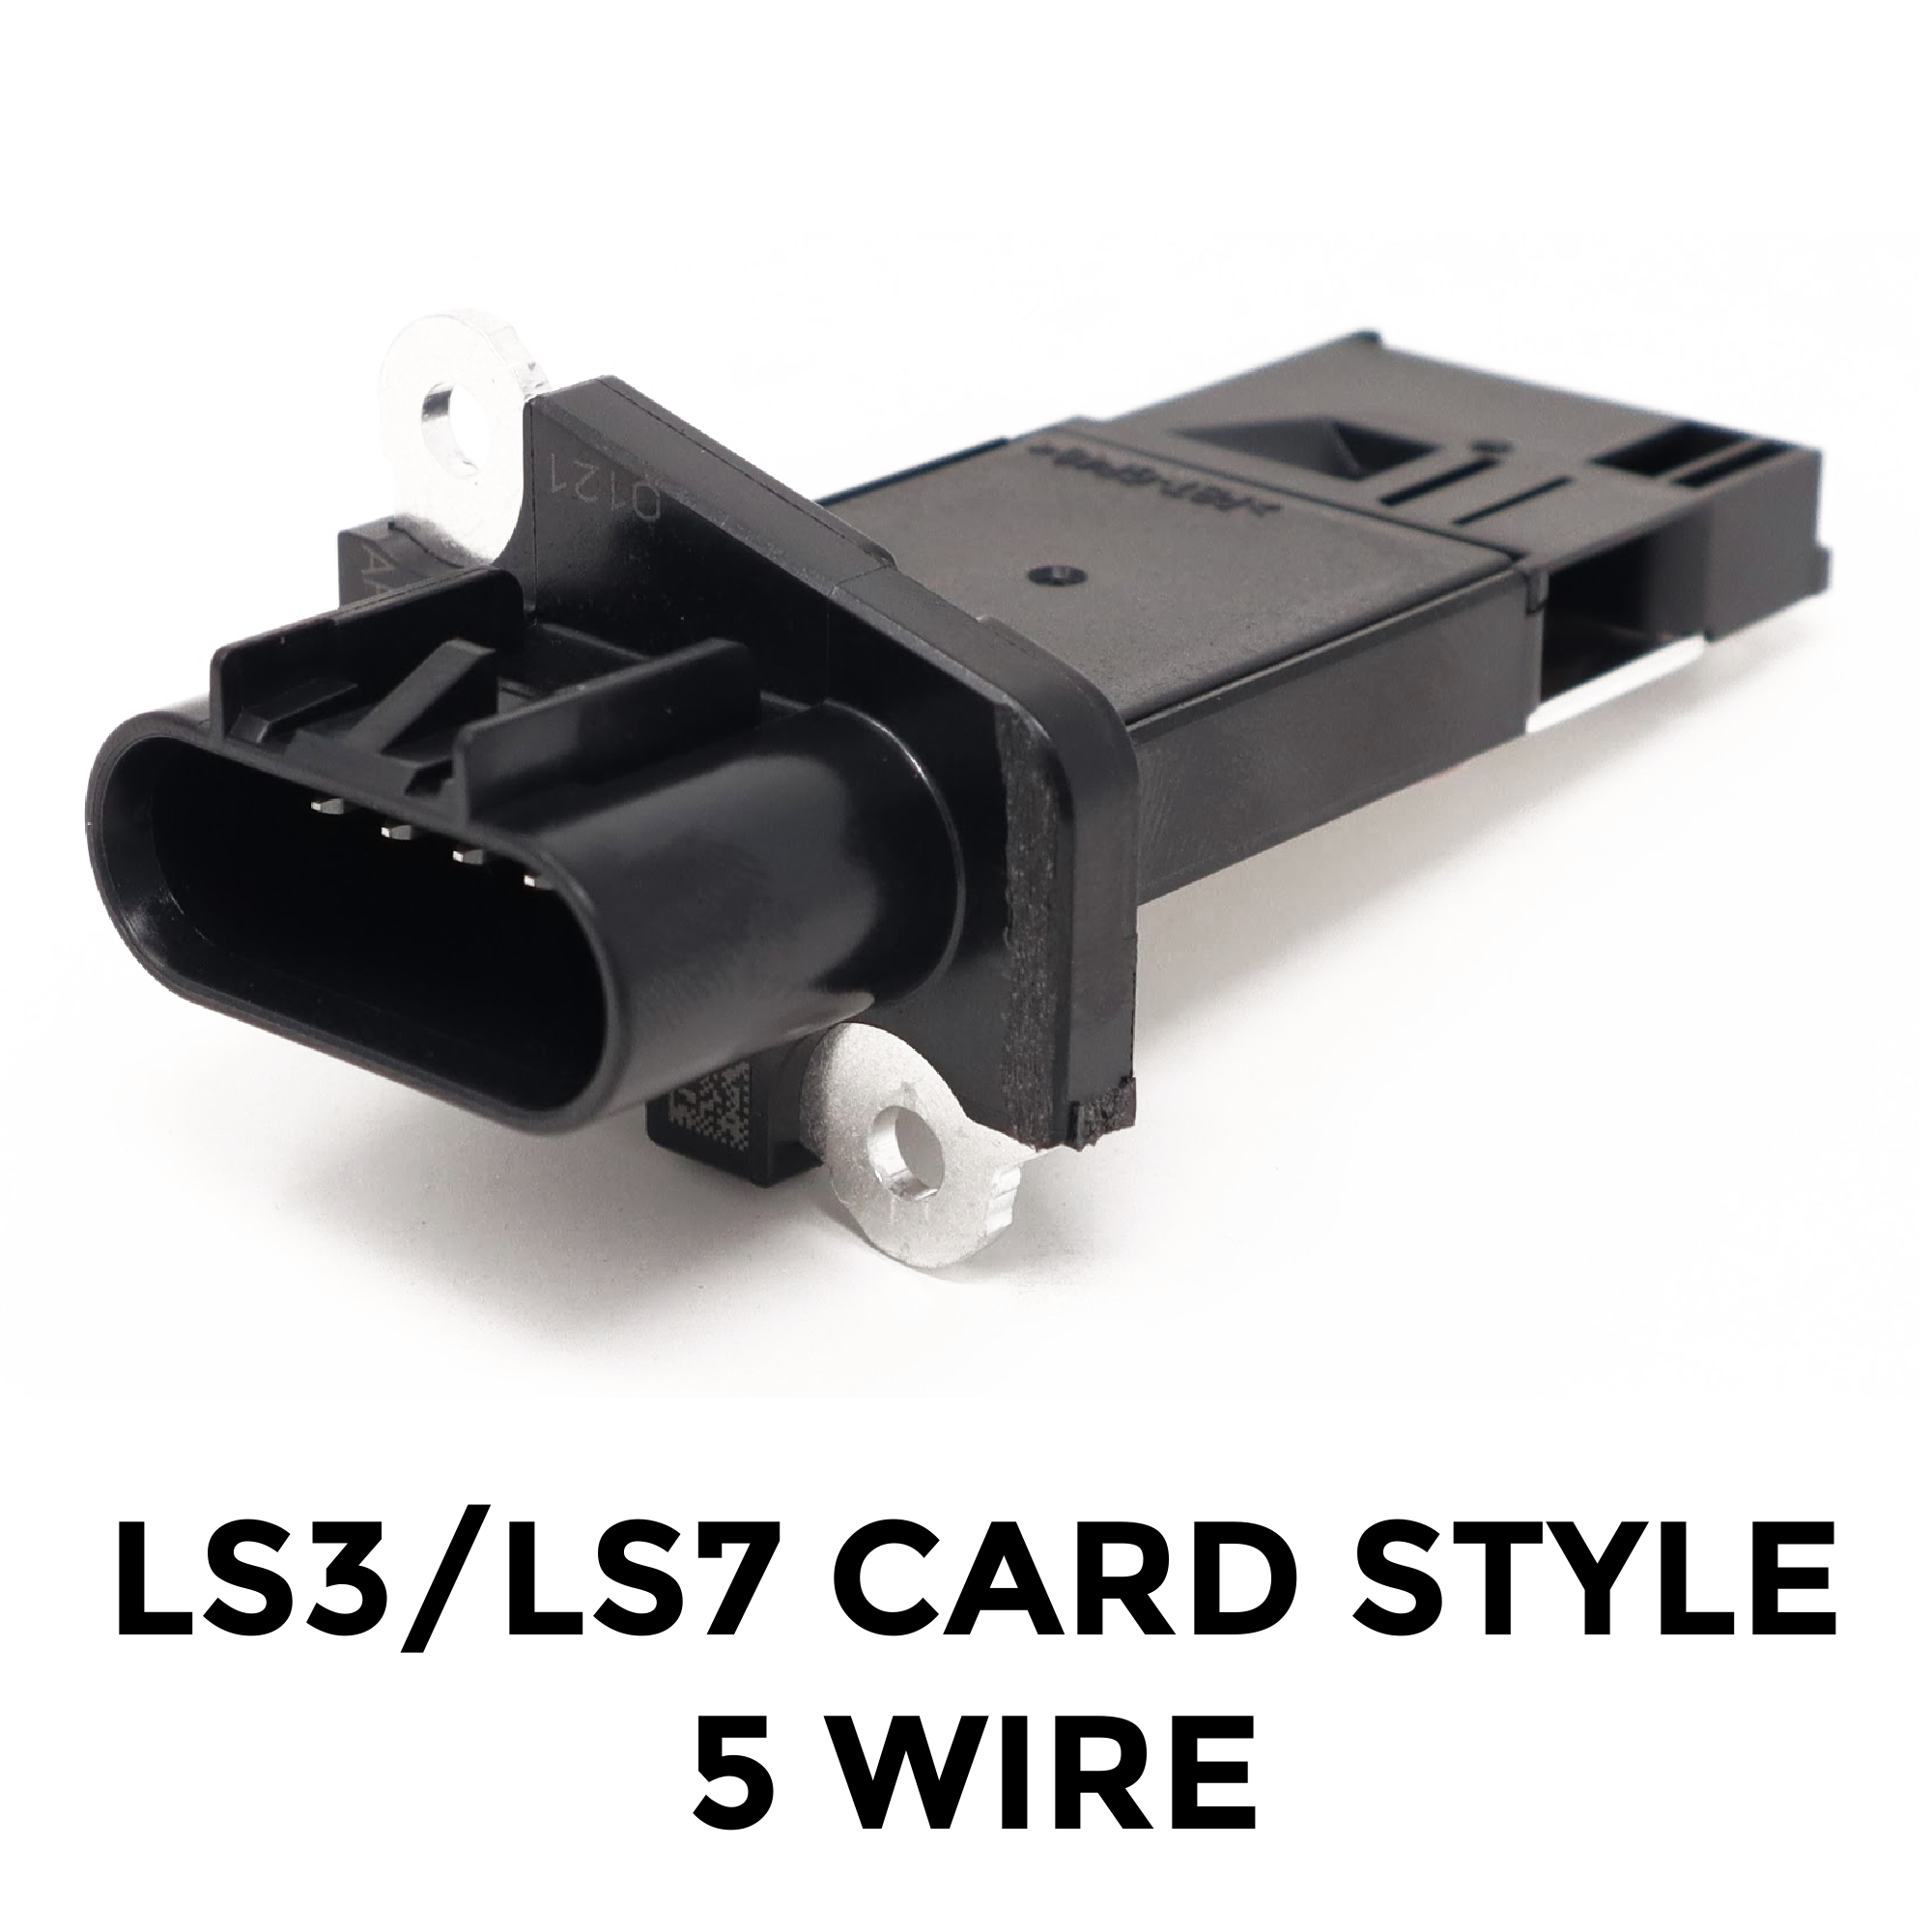 LS3/LS7 Card Style 5 Wire $0.00